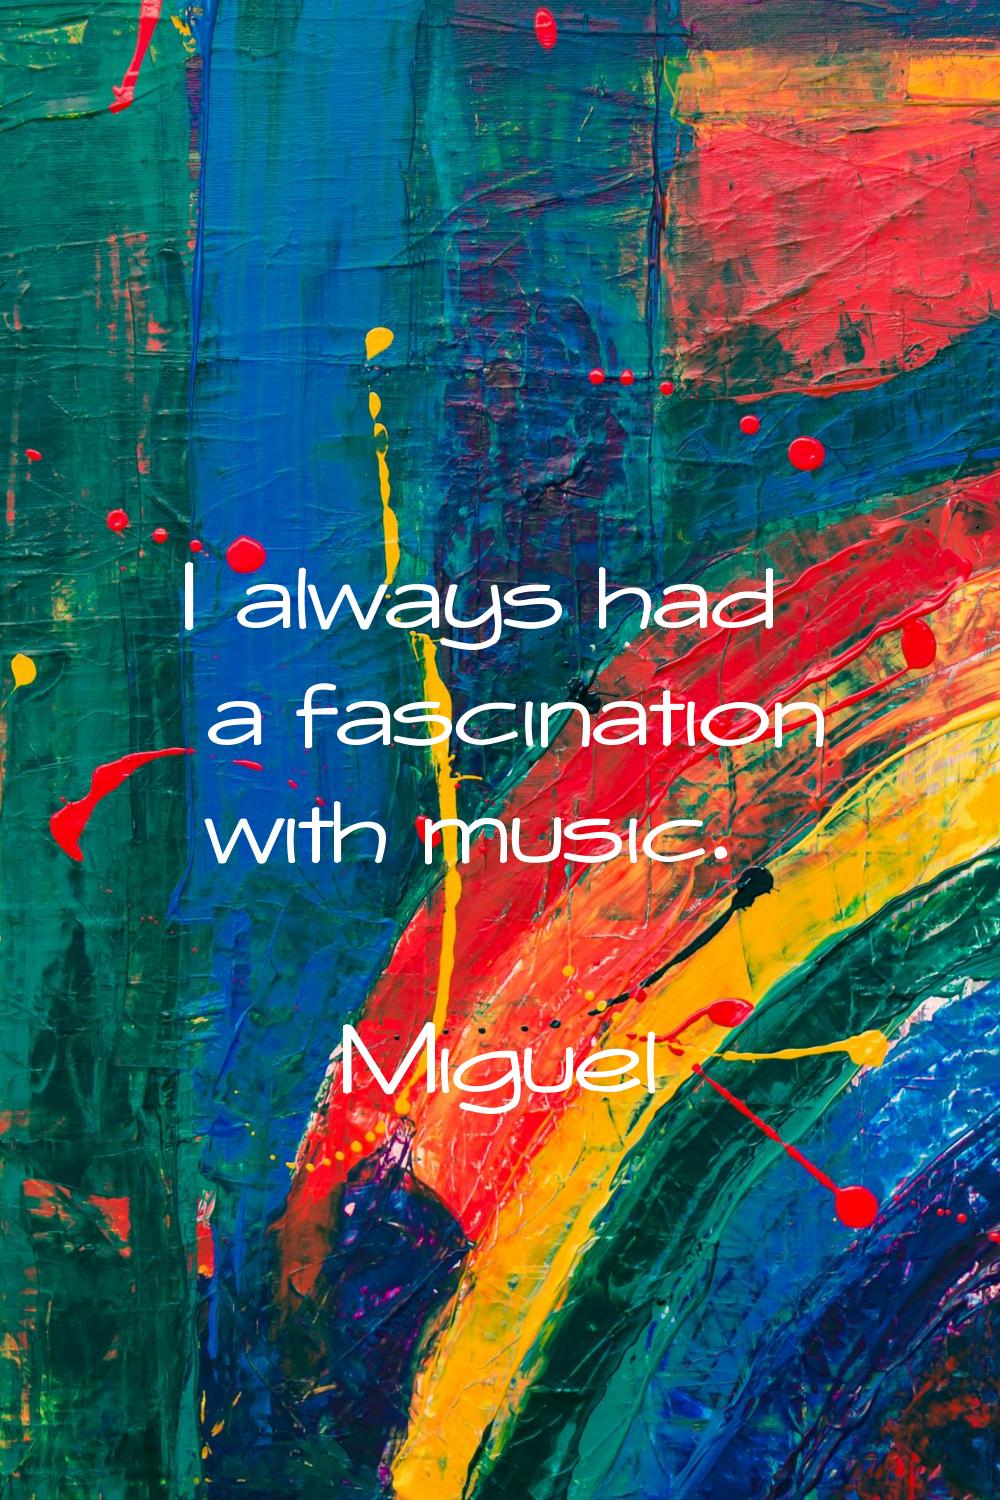 I always had a fascination with music.